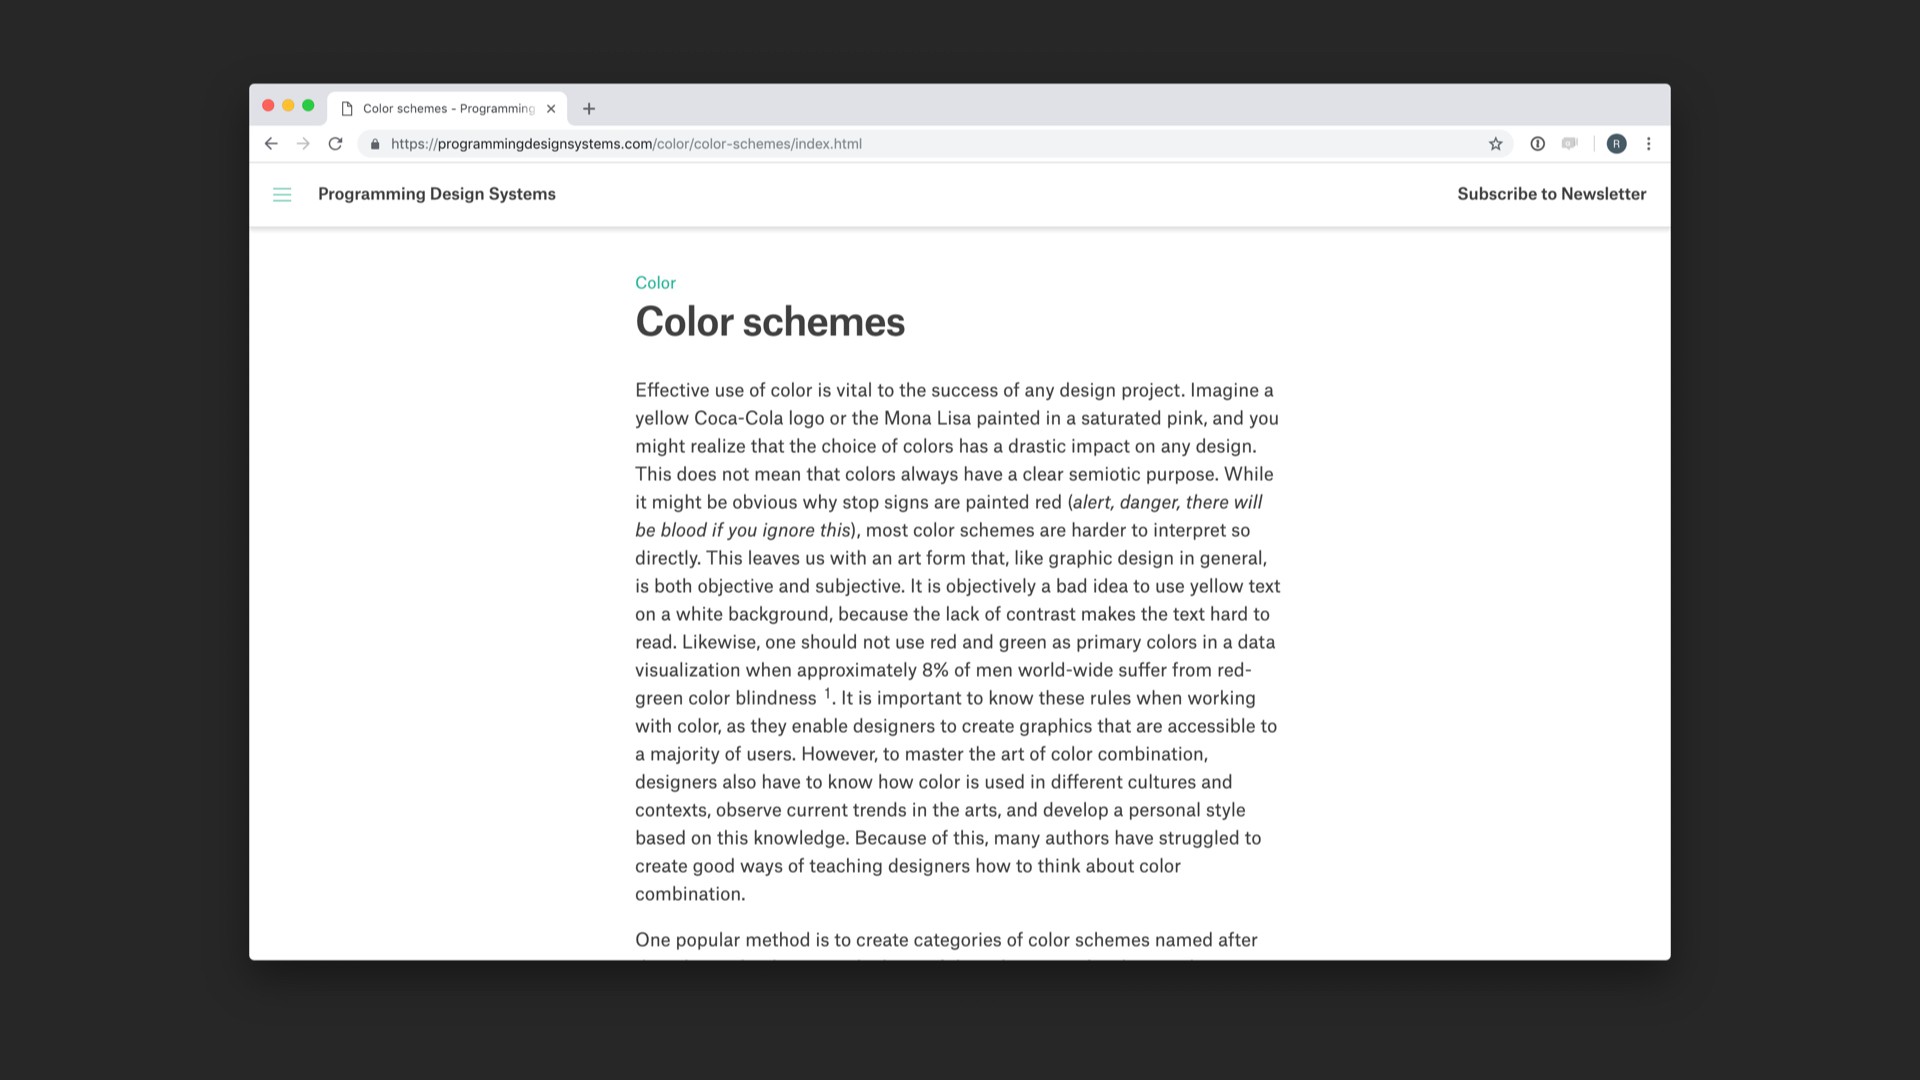 Screenshot of 'Color schemes' chapter of referenced website.